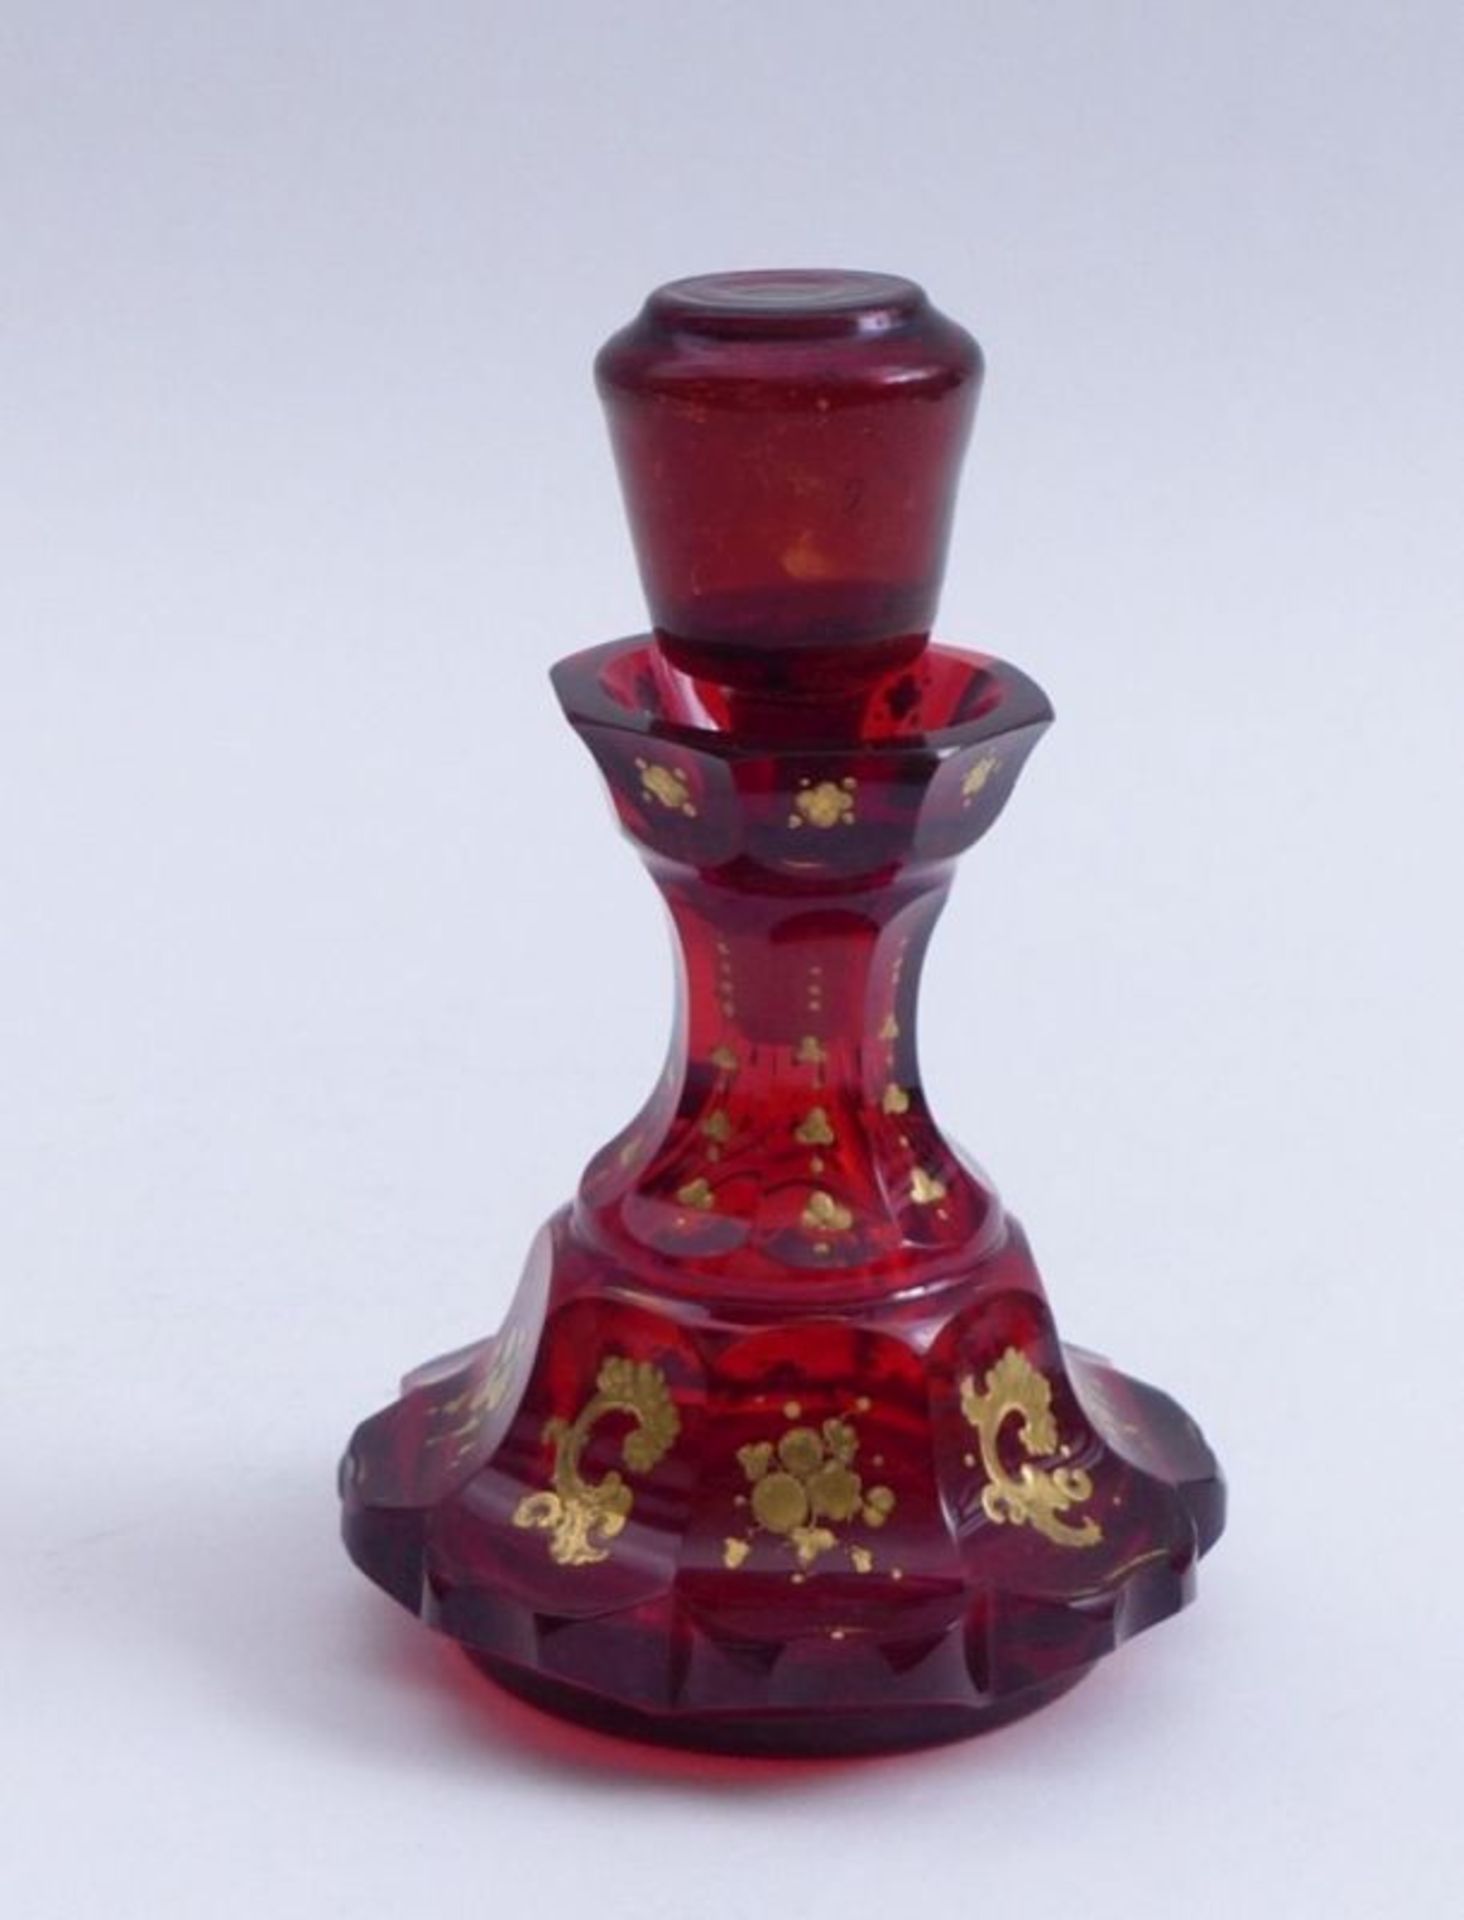 Small Biedermeier flaconBohemia, mid 19th c.Bell-shaped, faceted body with slender neck. Ruby red - Image 2 of 2